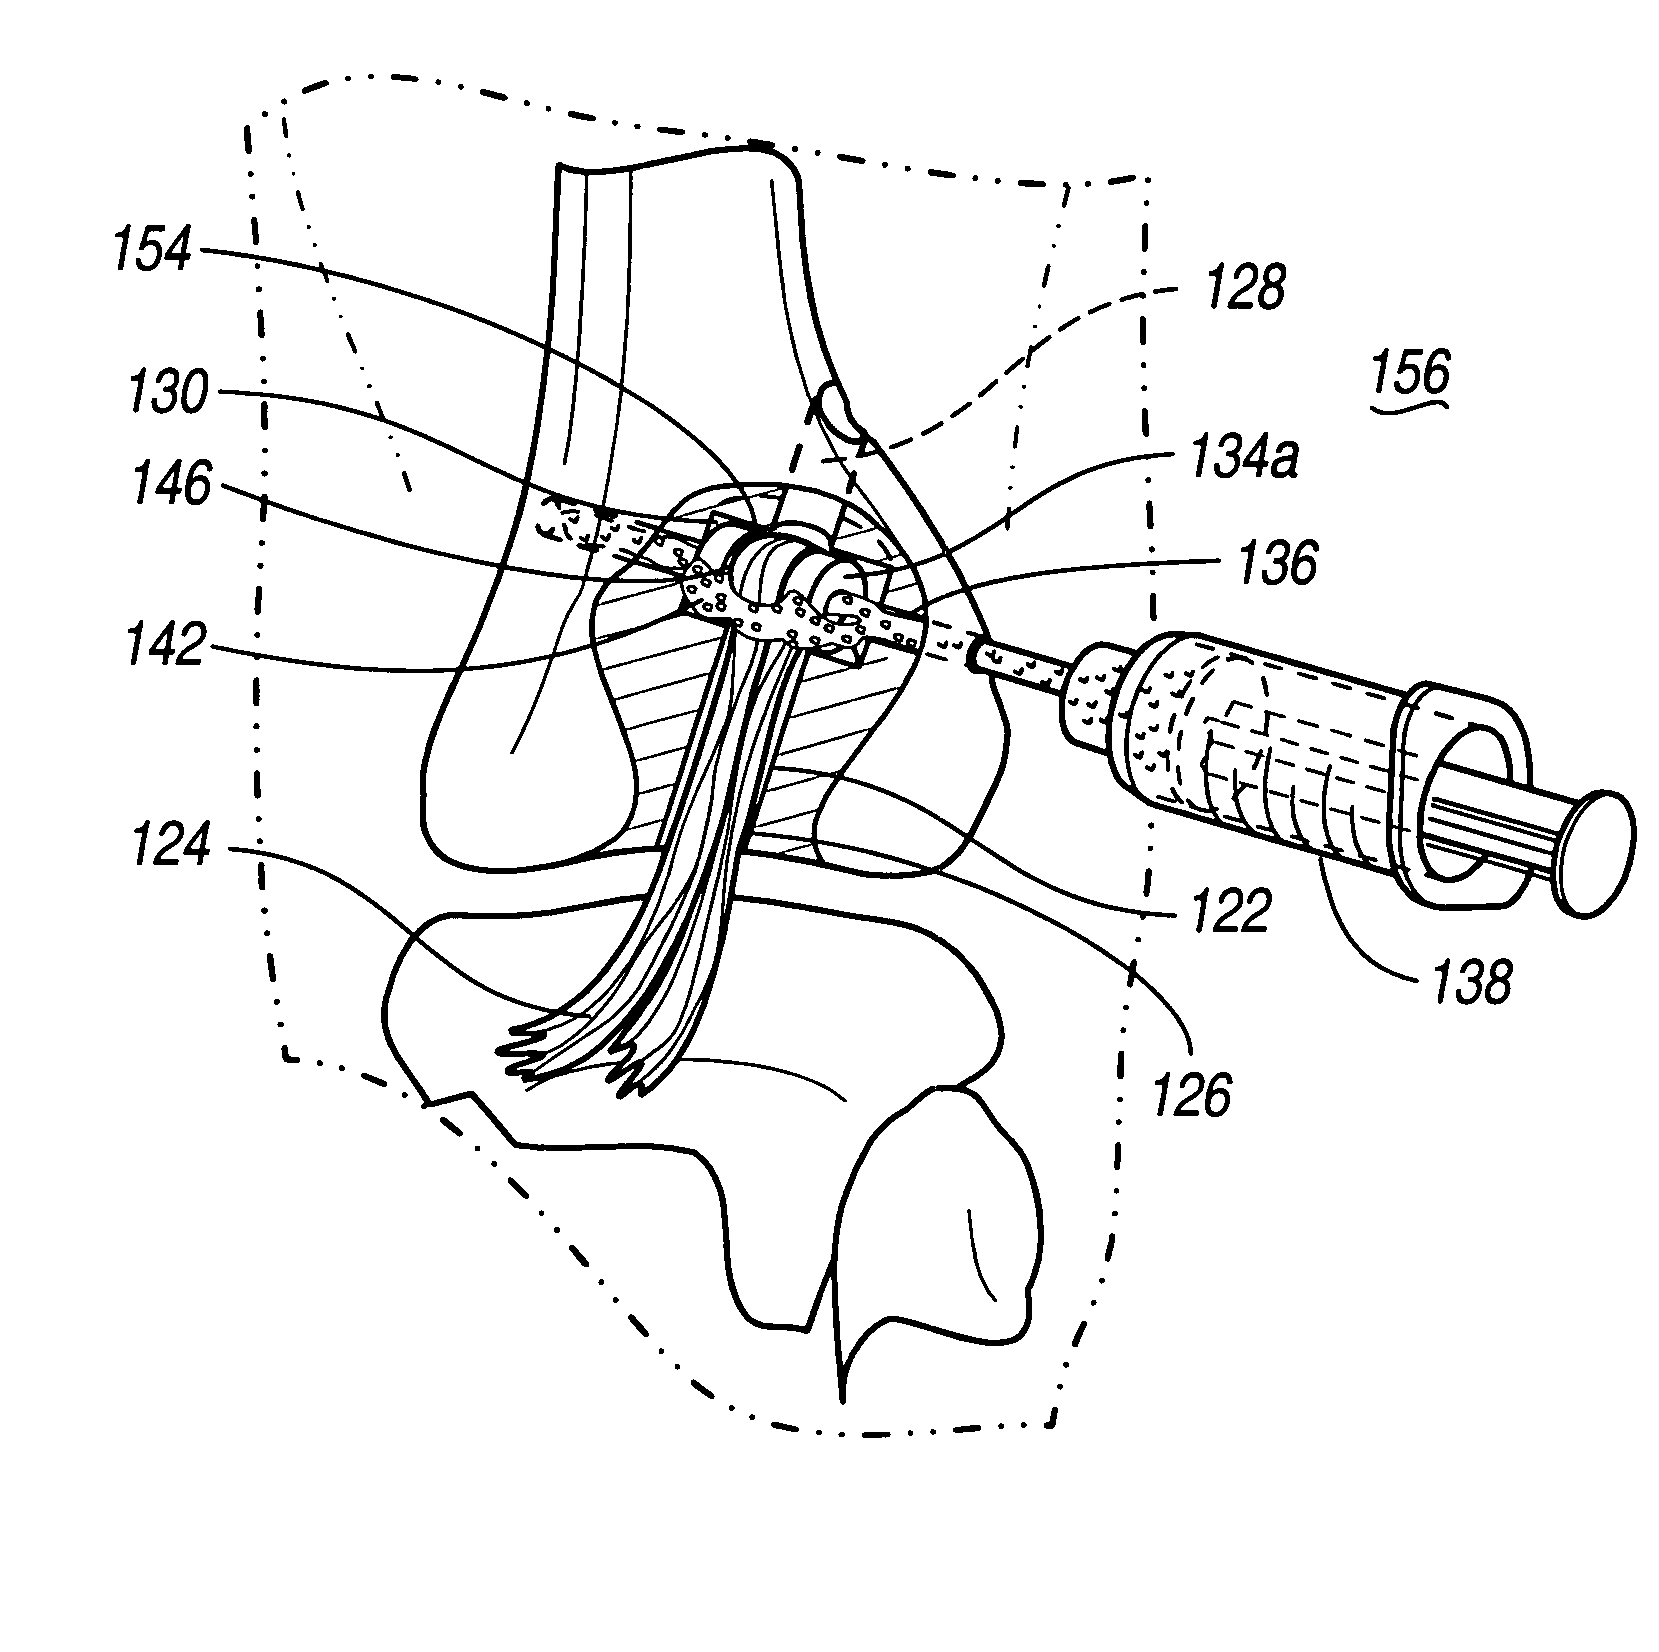 Method and apparatus for graft fixation